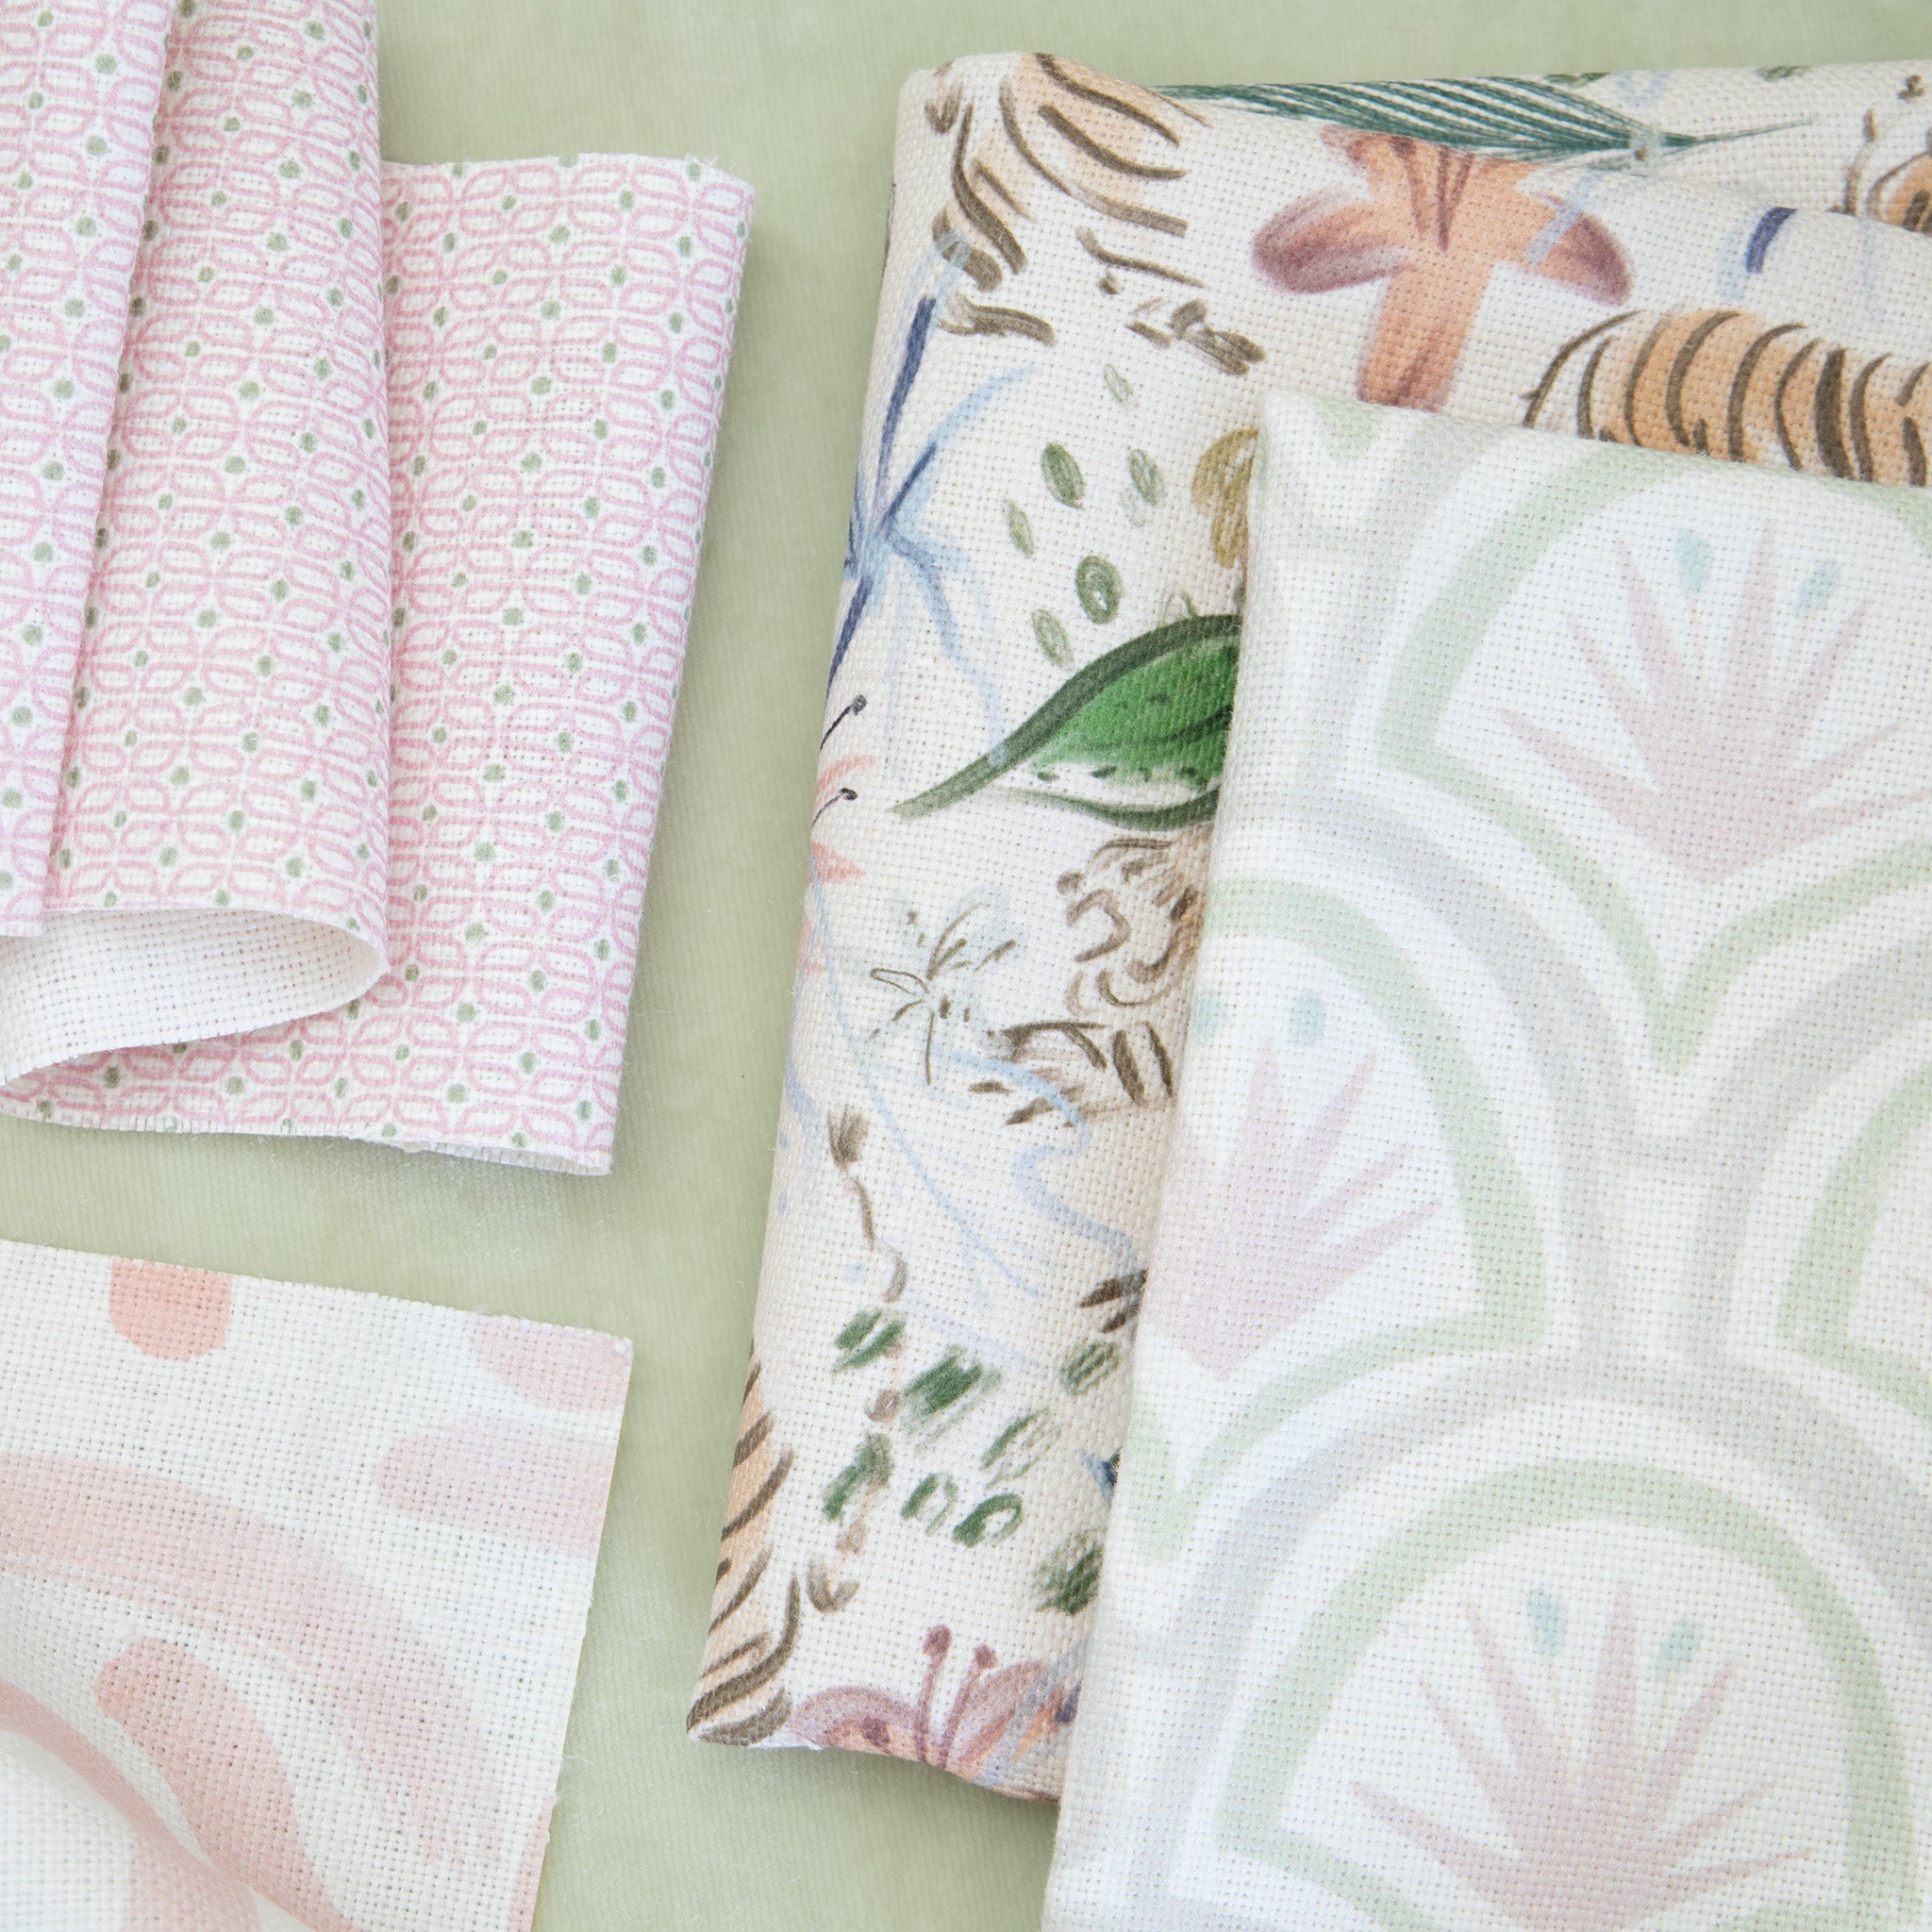 Interior design moodboard and fabric inspirations close-up with Pink Chinoiserie Tiger Printed Linen Swatch, Art Deco Palm Pattern Printed Linen Swatch, Pink Graphic Printed Linen Swatch, and Pink Geometric Printed Linen Swatch